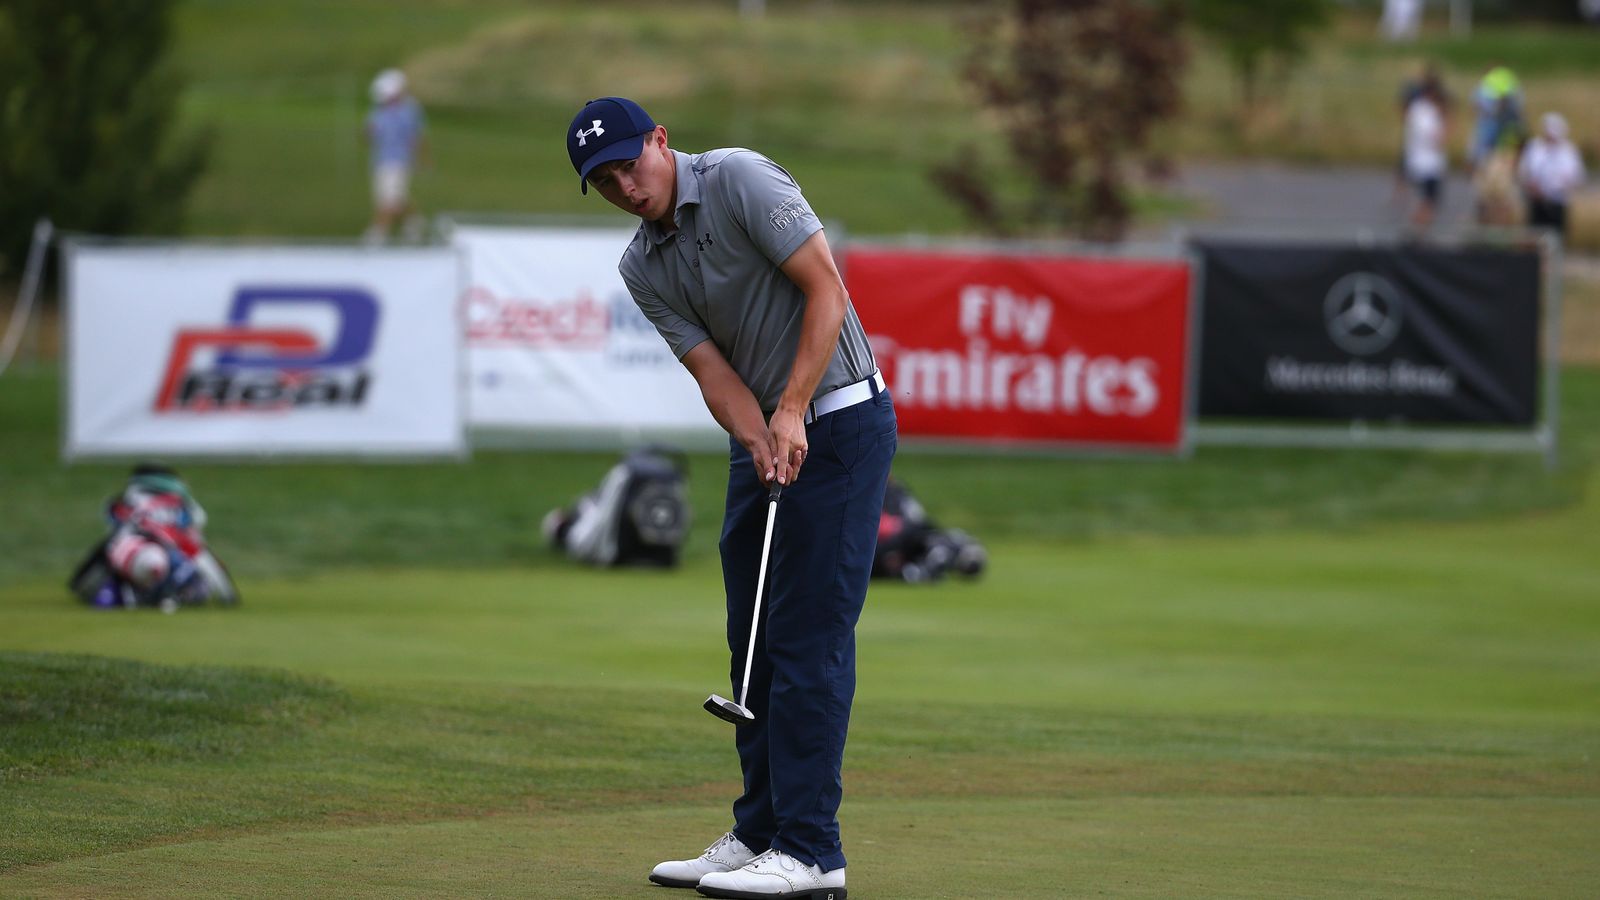 Matthew Fitzpatrick and Pelle Edberg share lead at the Czech Masters